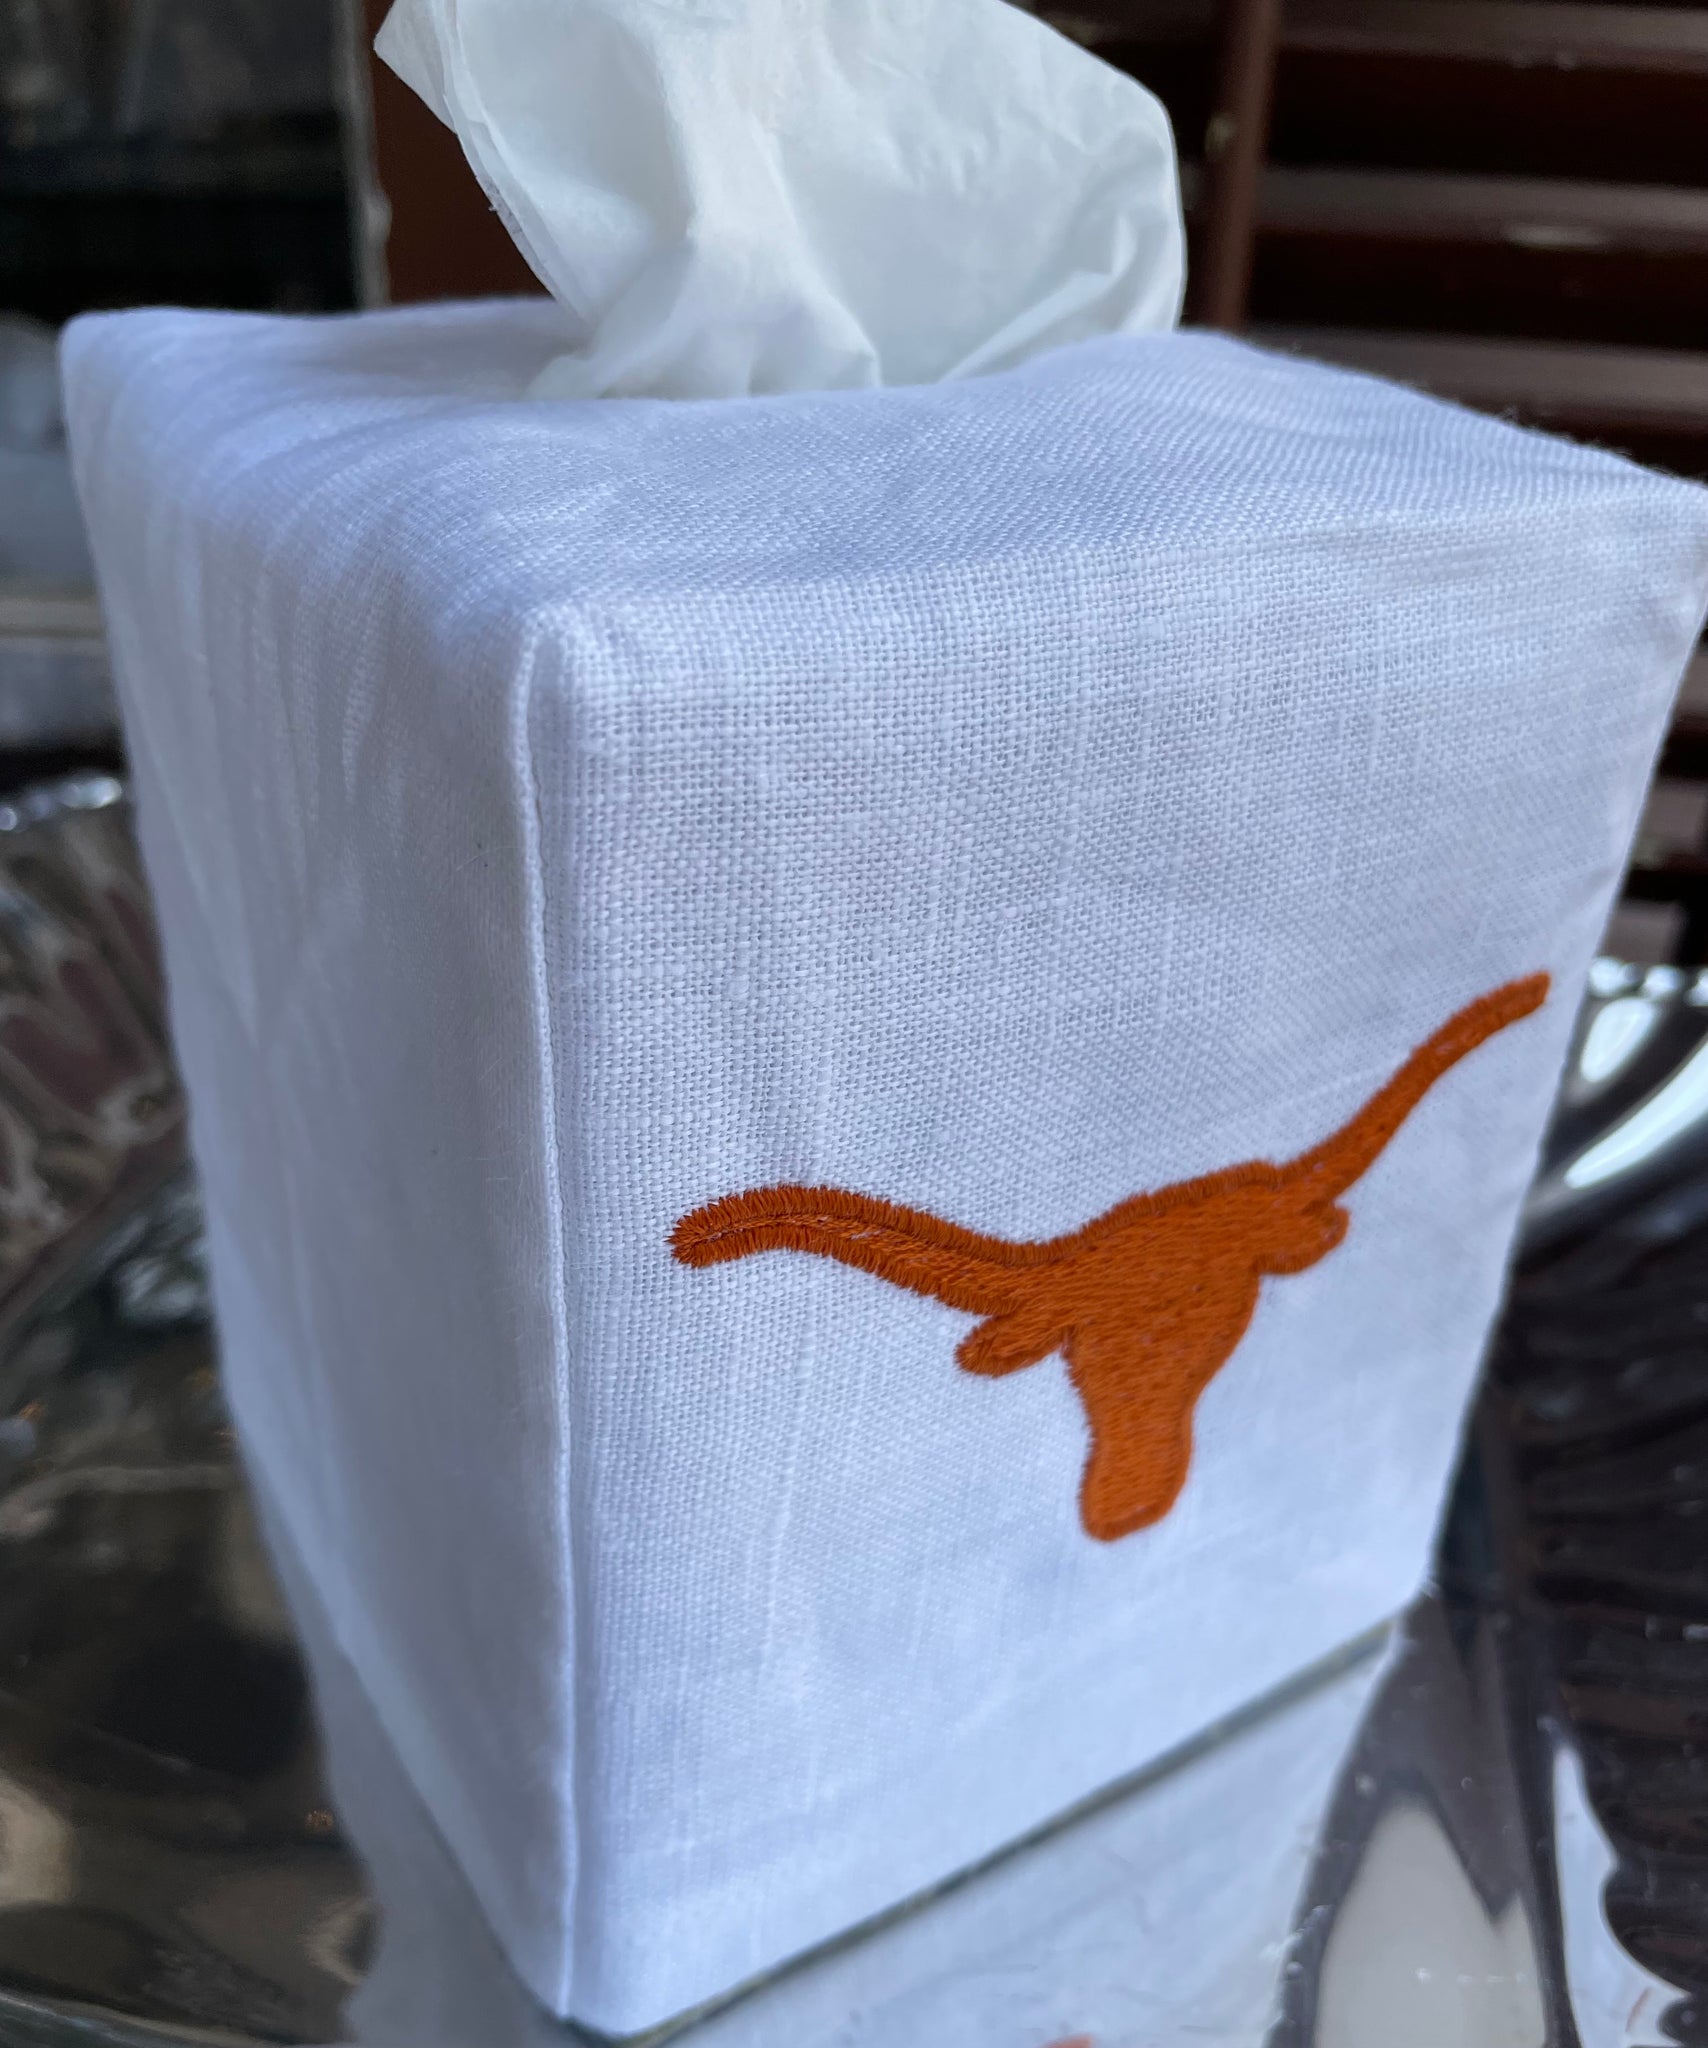 Embroidered Tissue Box Cover – MADRE